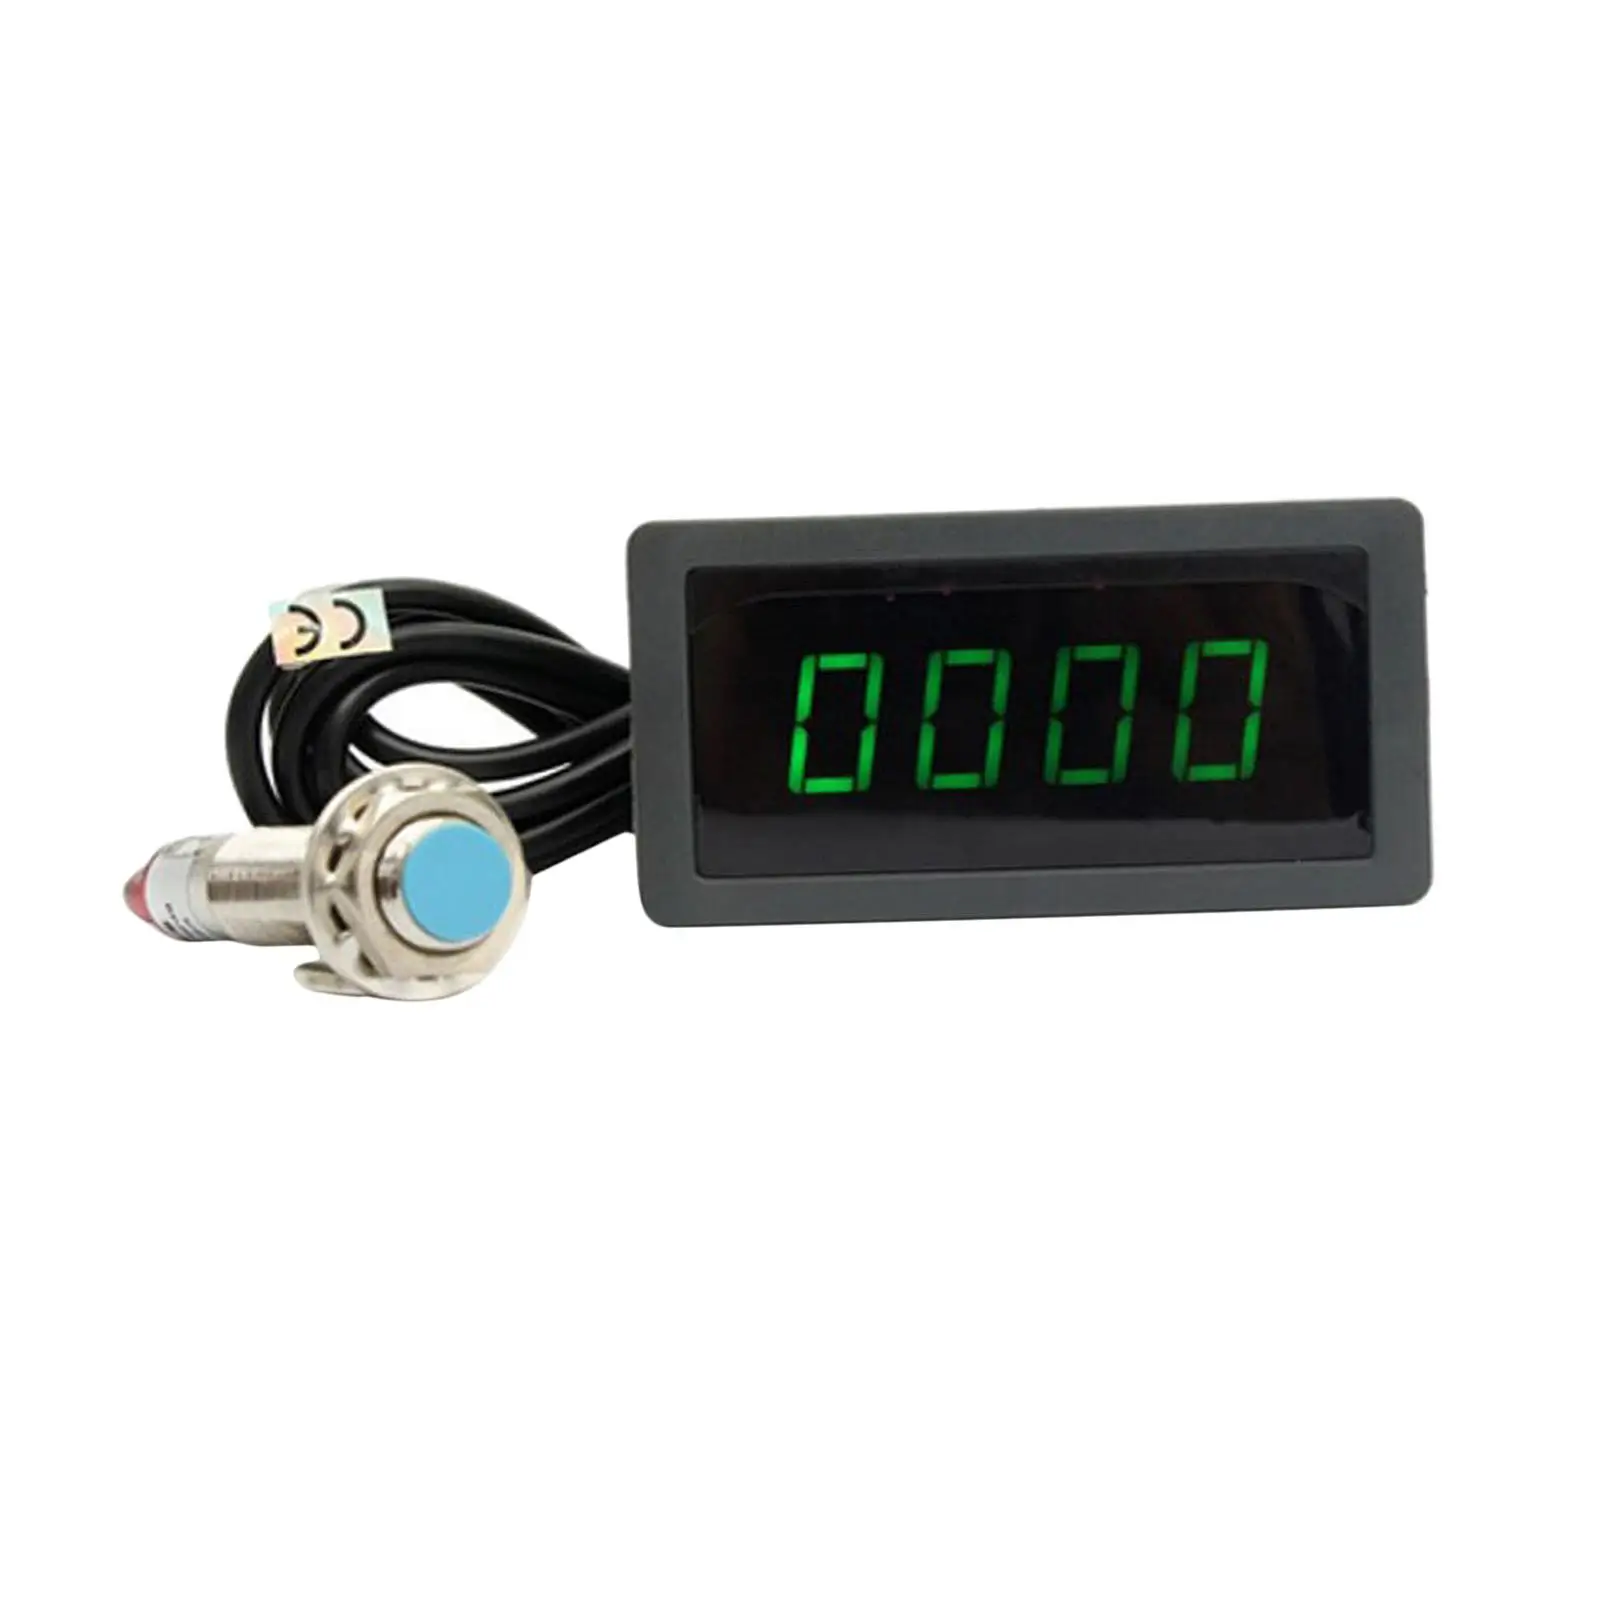 Tachometer Digital Tach Meter for Engine  Motocycle Outboards Snowmobile Marine Boat